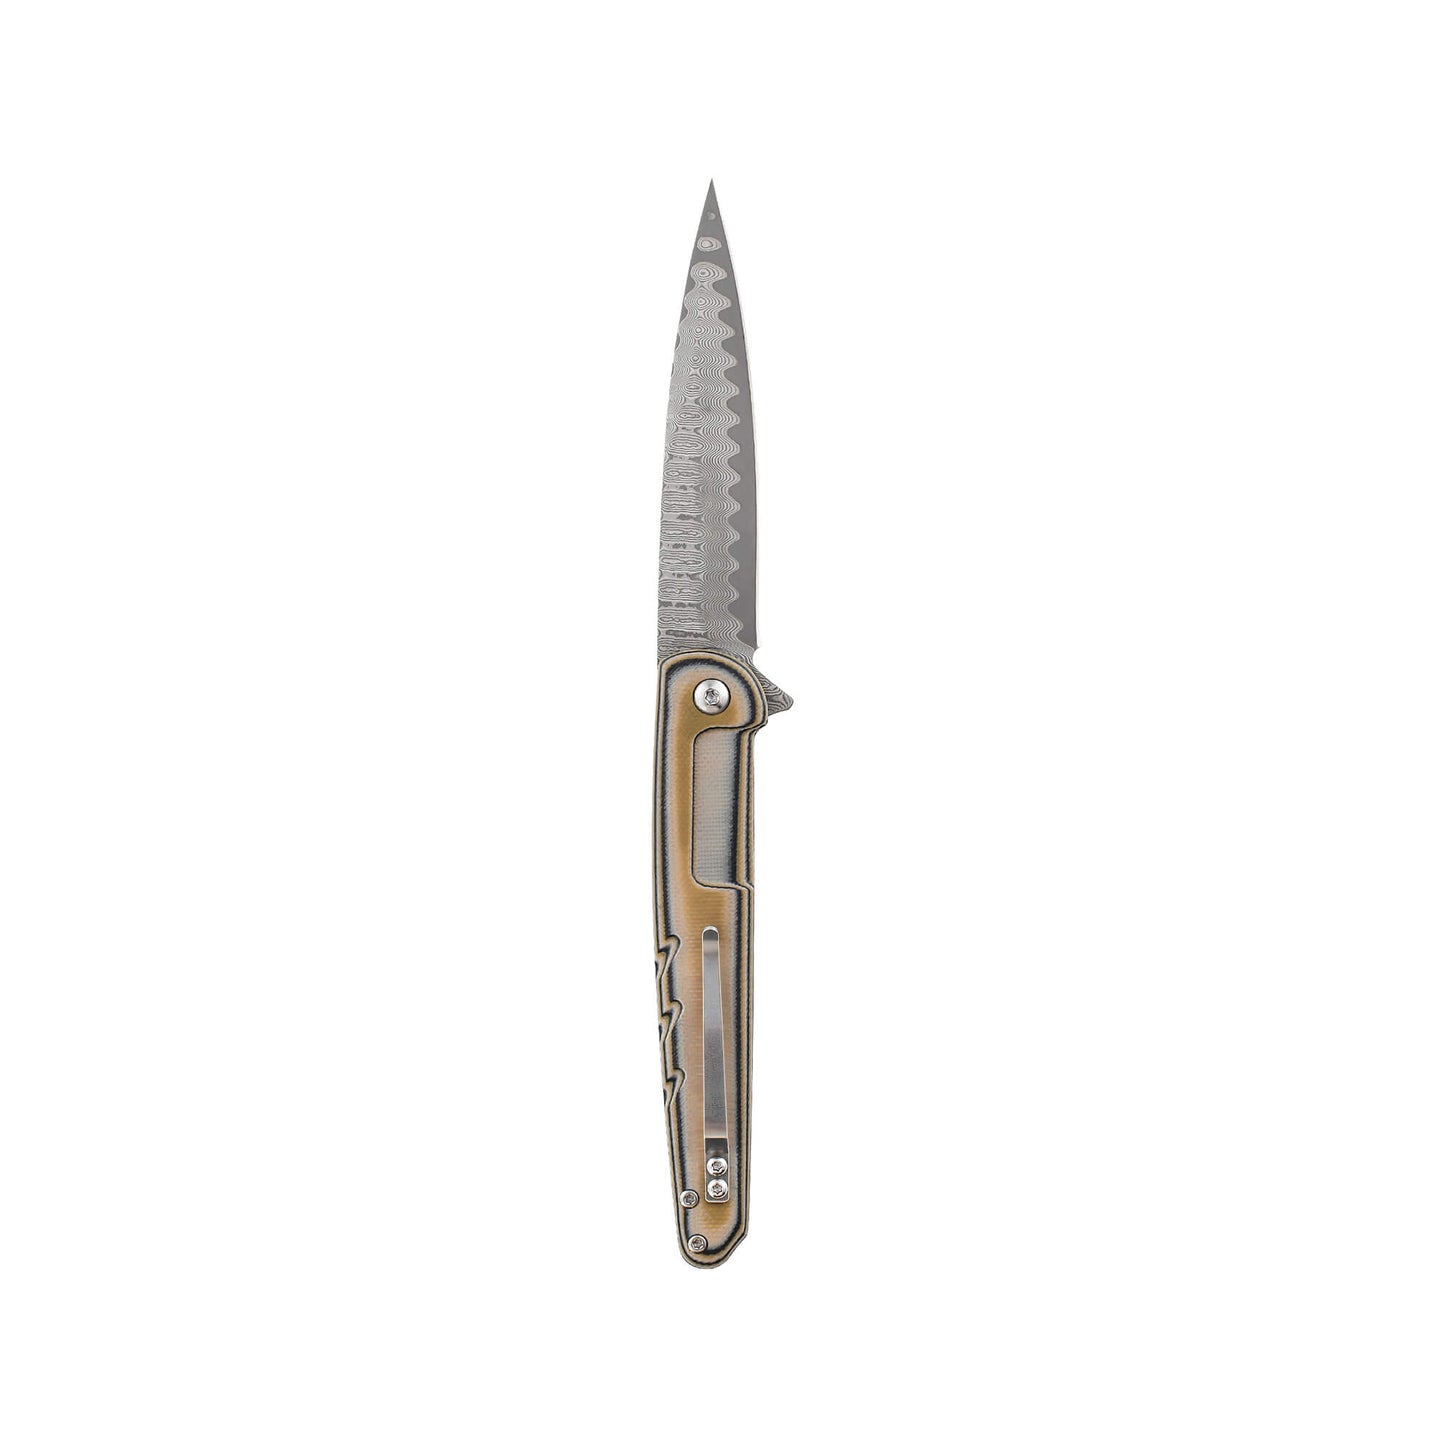 Compact Alicer folding knife with 3.32" 440C stainless steel blade, 4.56" G10 handle, and advanced grip. Weighs .18lbs